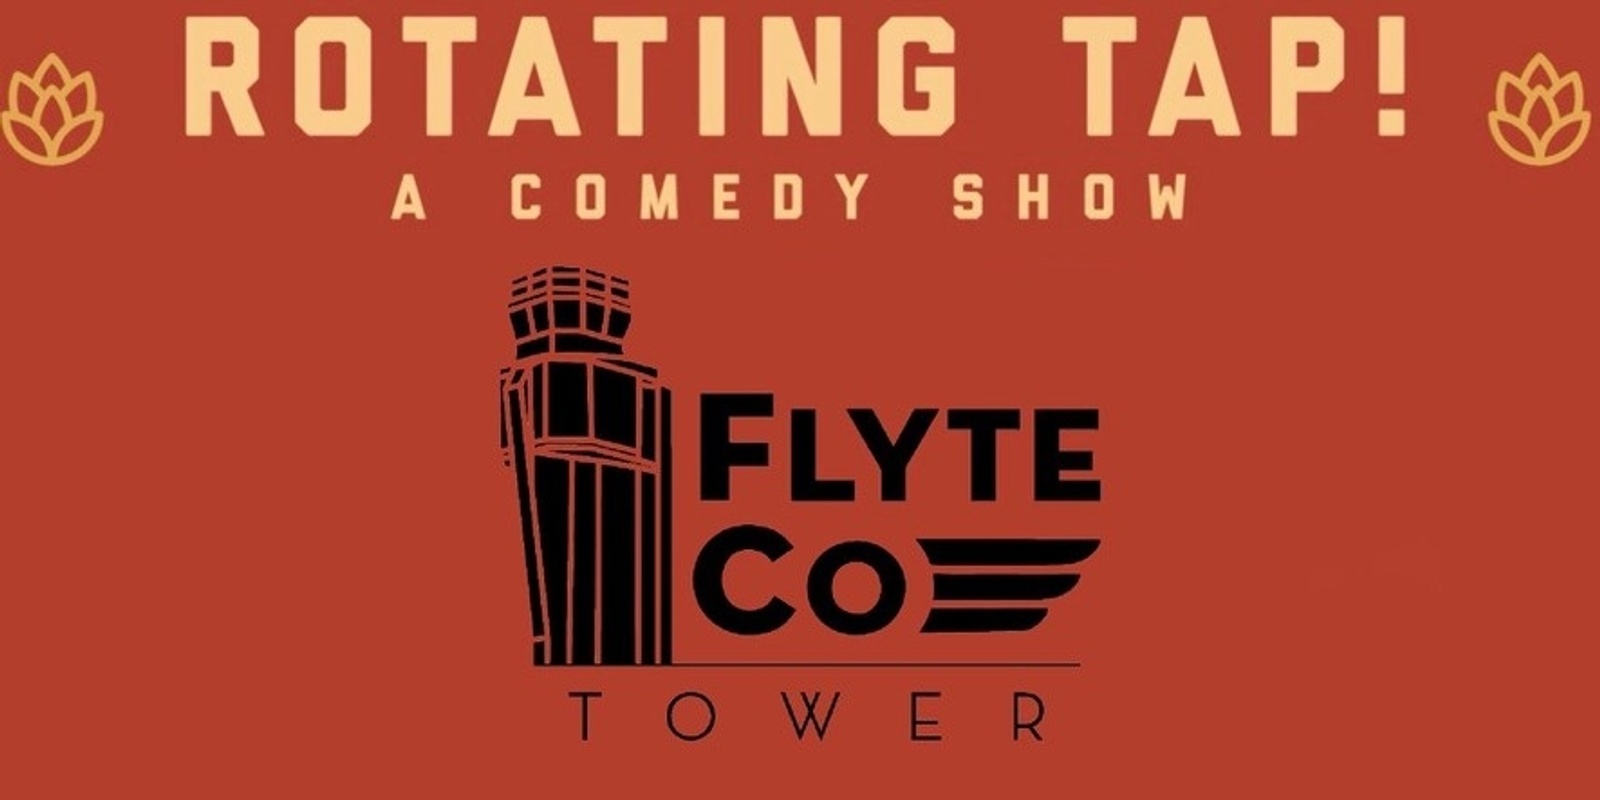 Rotating Tap Comedy @ FlyteCo Tower